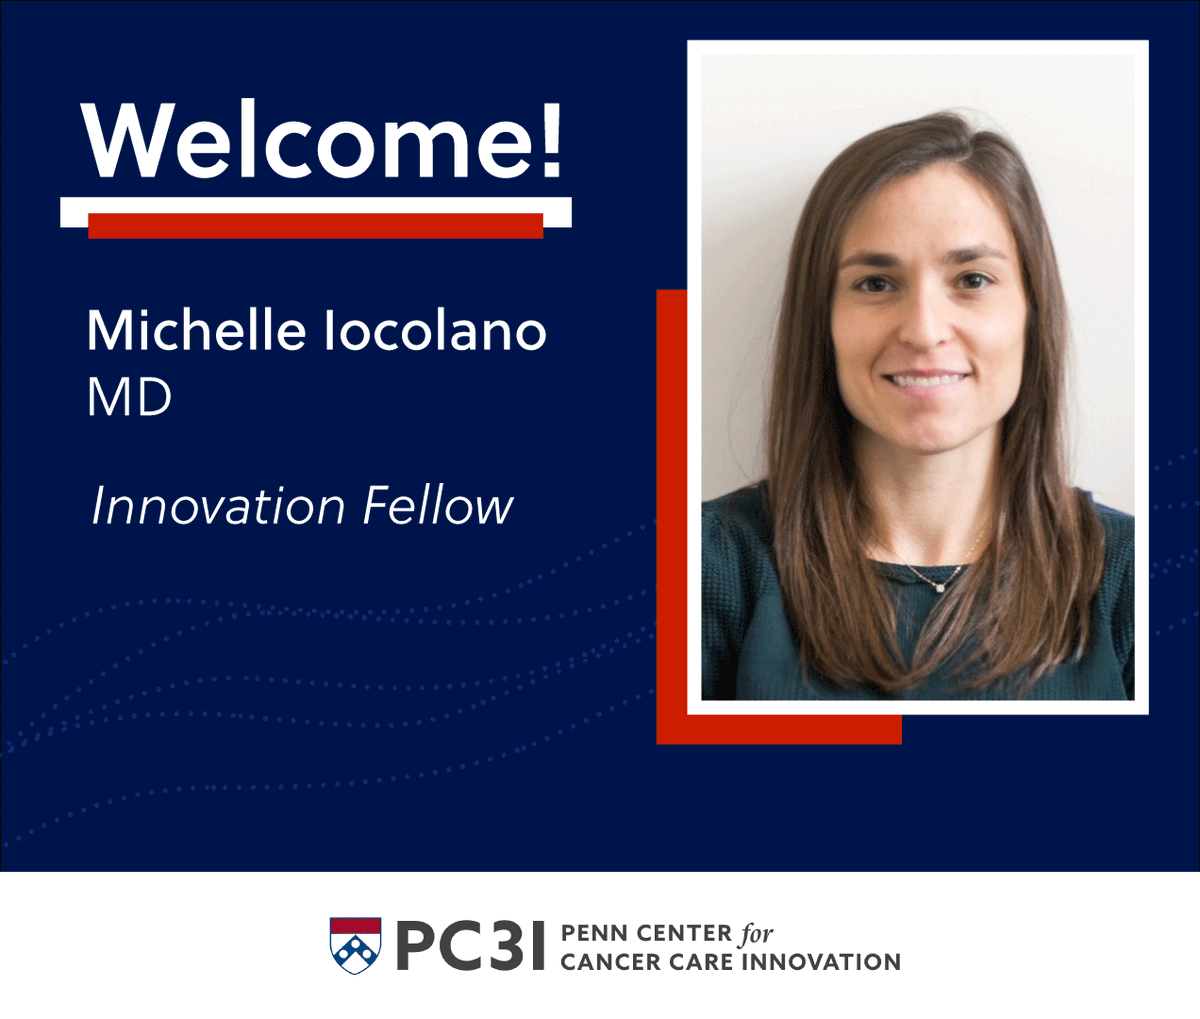 Introducing new PC3I Innovation Fellow Michelle Iocolano, Chief Resident in the Department of @PennRadOnc. Her academic interests include improving #cancercare delivery & #clinicaltrial design and implementation. pc3i.upenn.edu/people/michell…